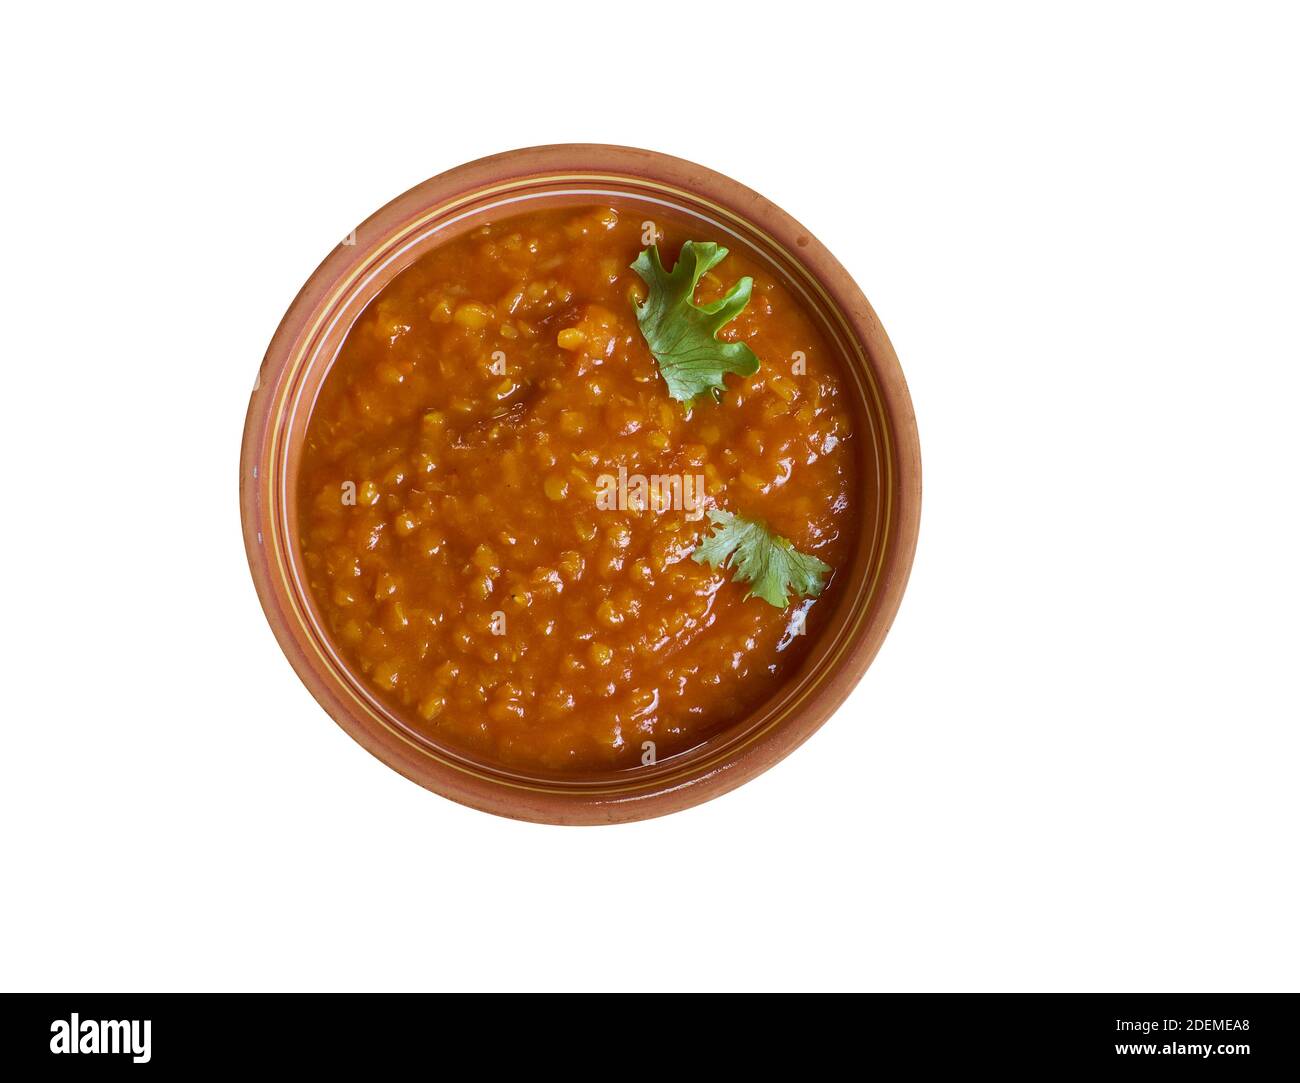 Moroccan-style pumpkin and red lentil soup close up Stock Photo